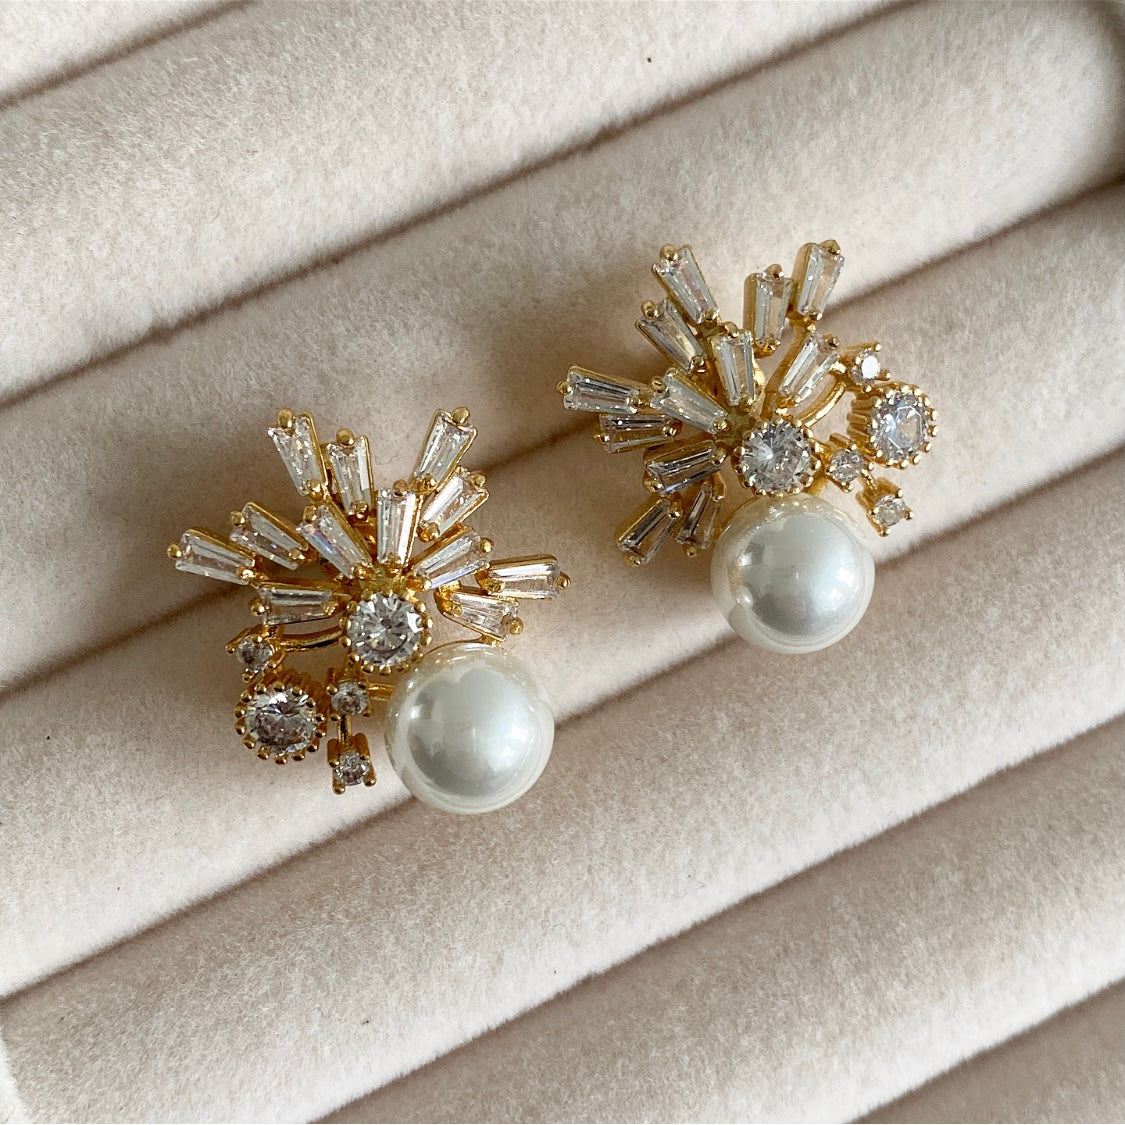 Our Gold Pearl Clusters are crafted from dazzling gold cluster crystals and luminous pearls, providing a touch of glimmer and glamour. Each piece is designed to catch the eye and make a statement. Perfect for any occasion.  Details: 2.5x2cm